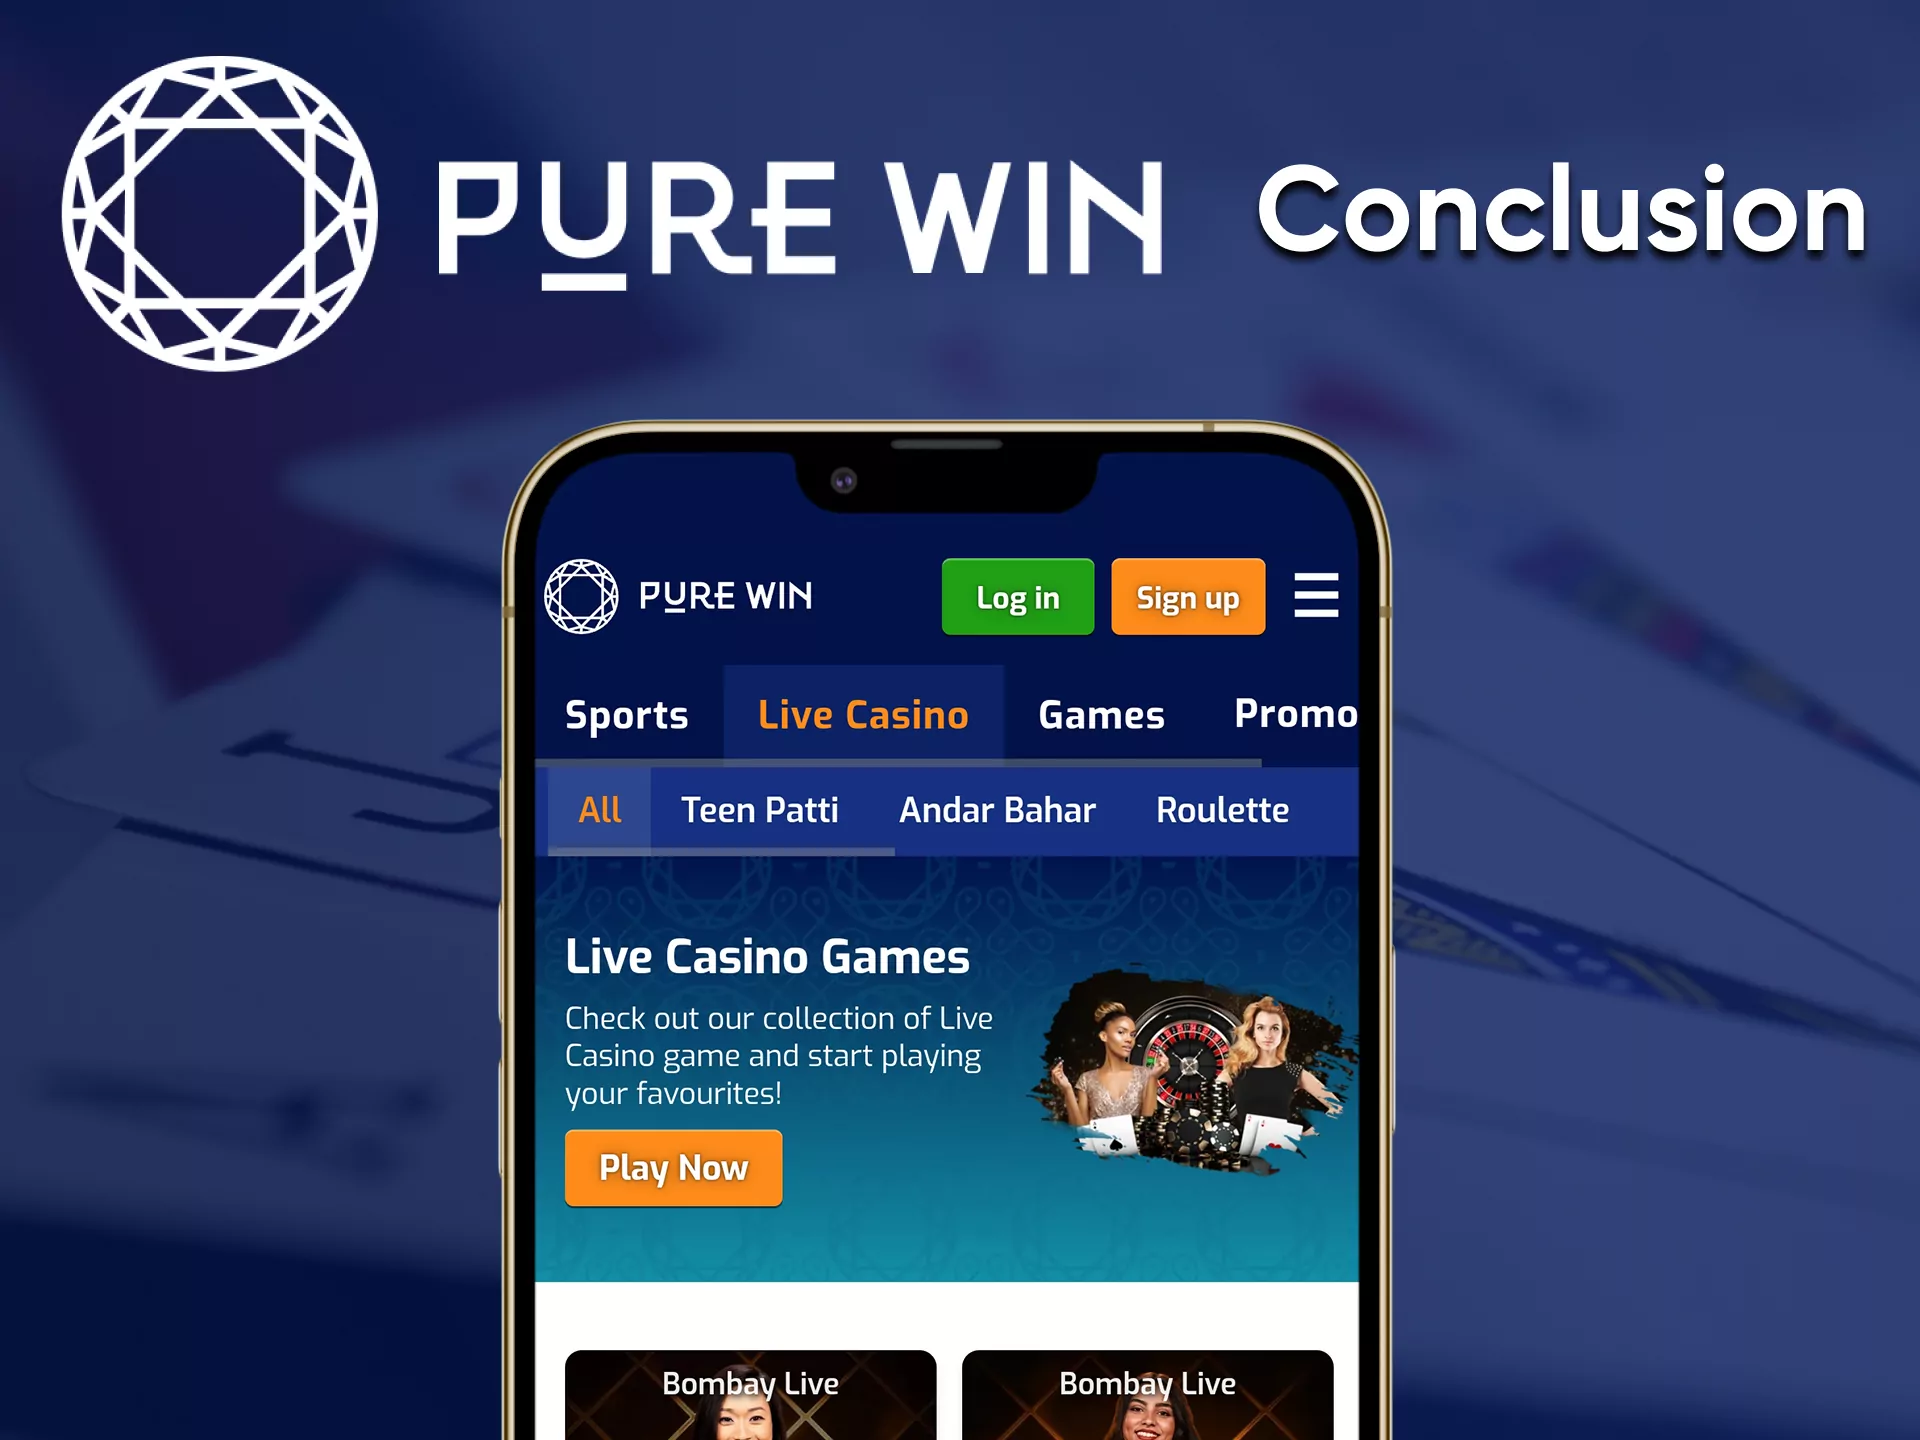 Pure Win has a great app suitable for modern mobile devices.